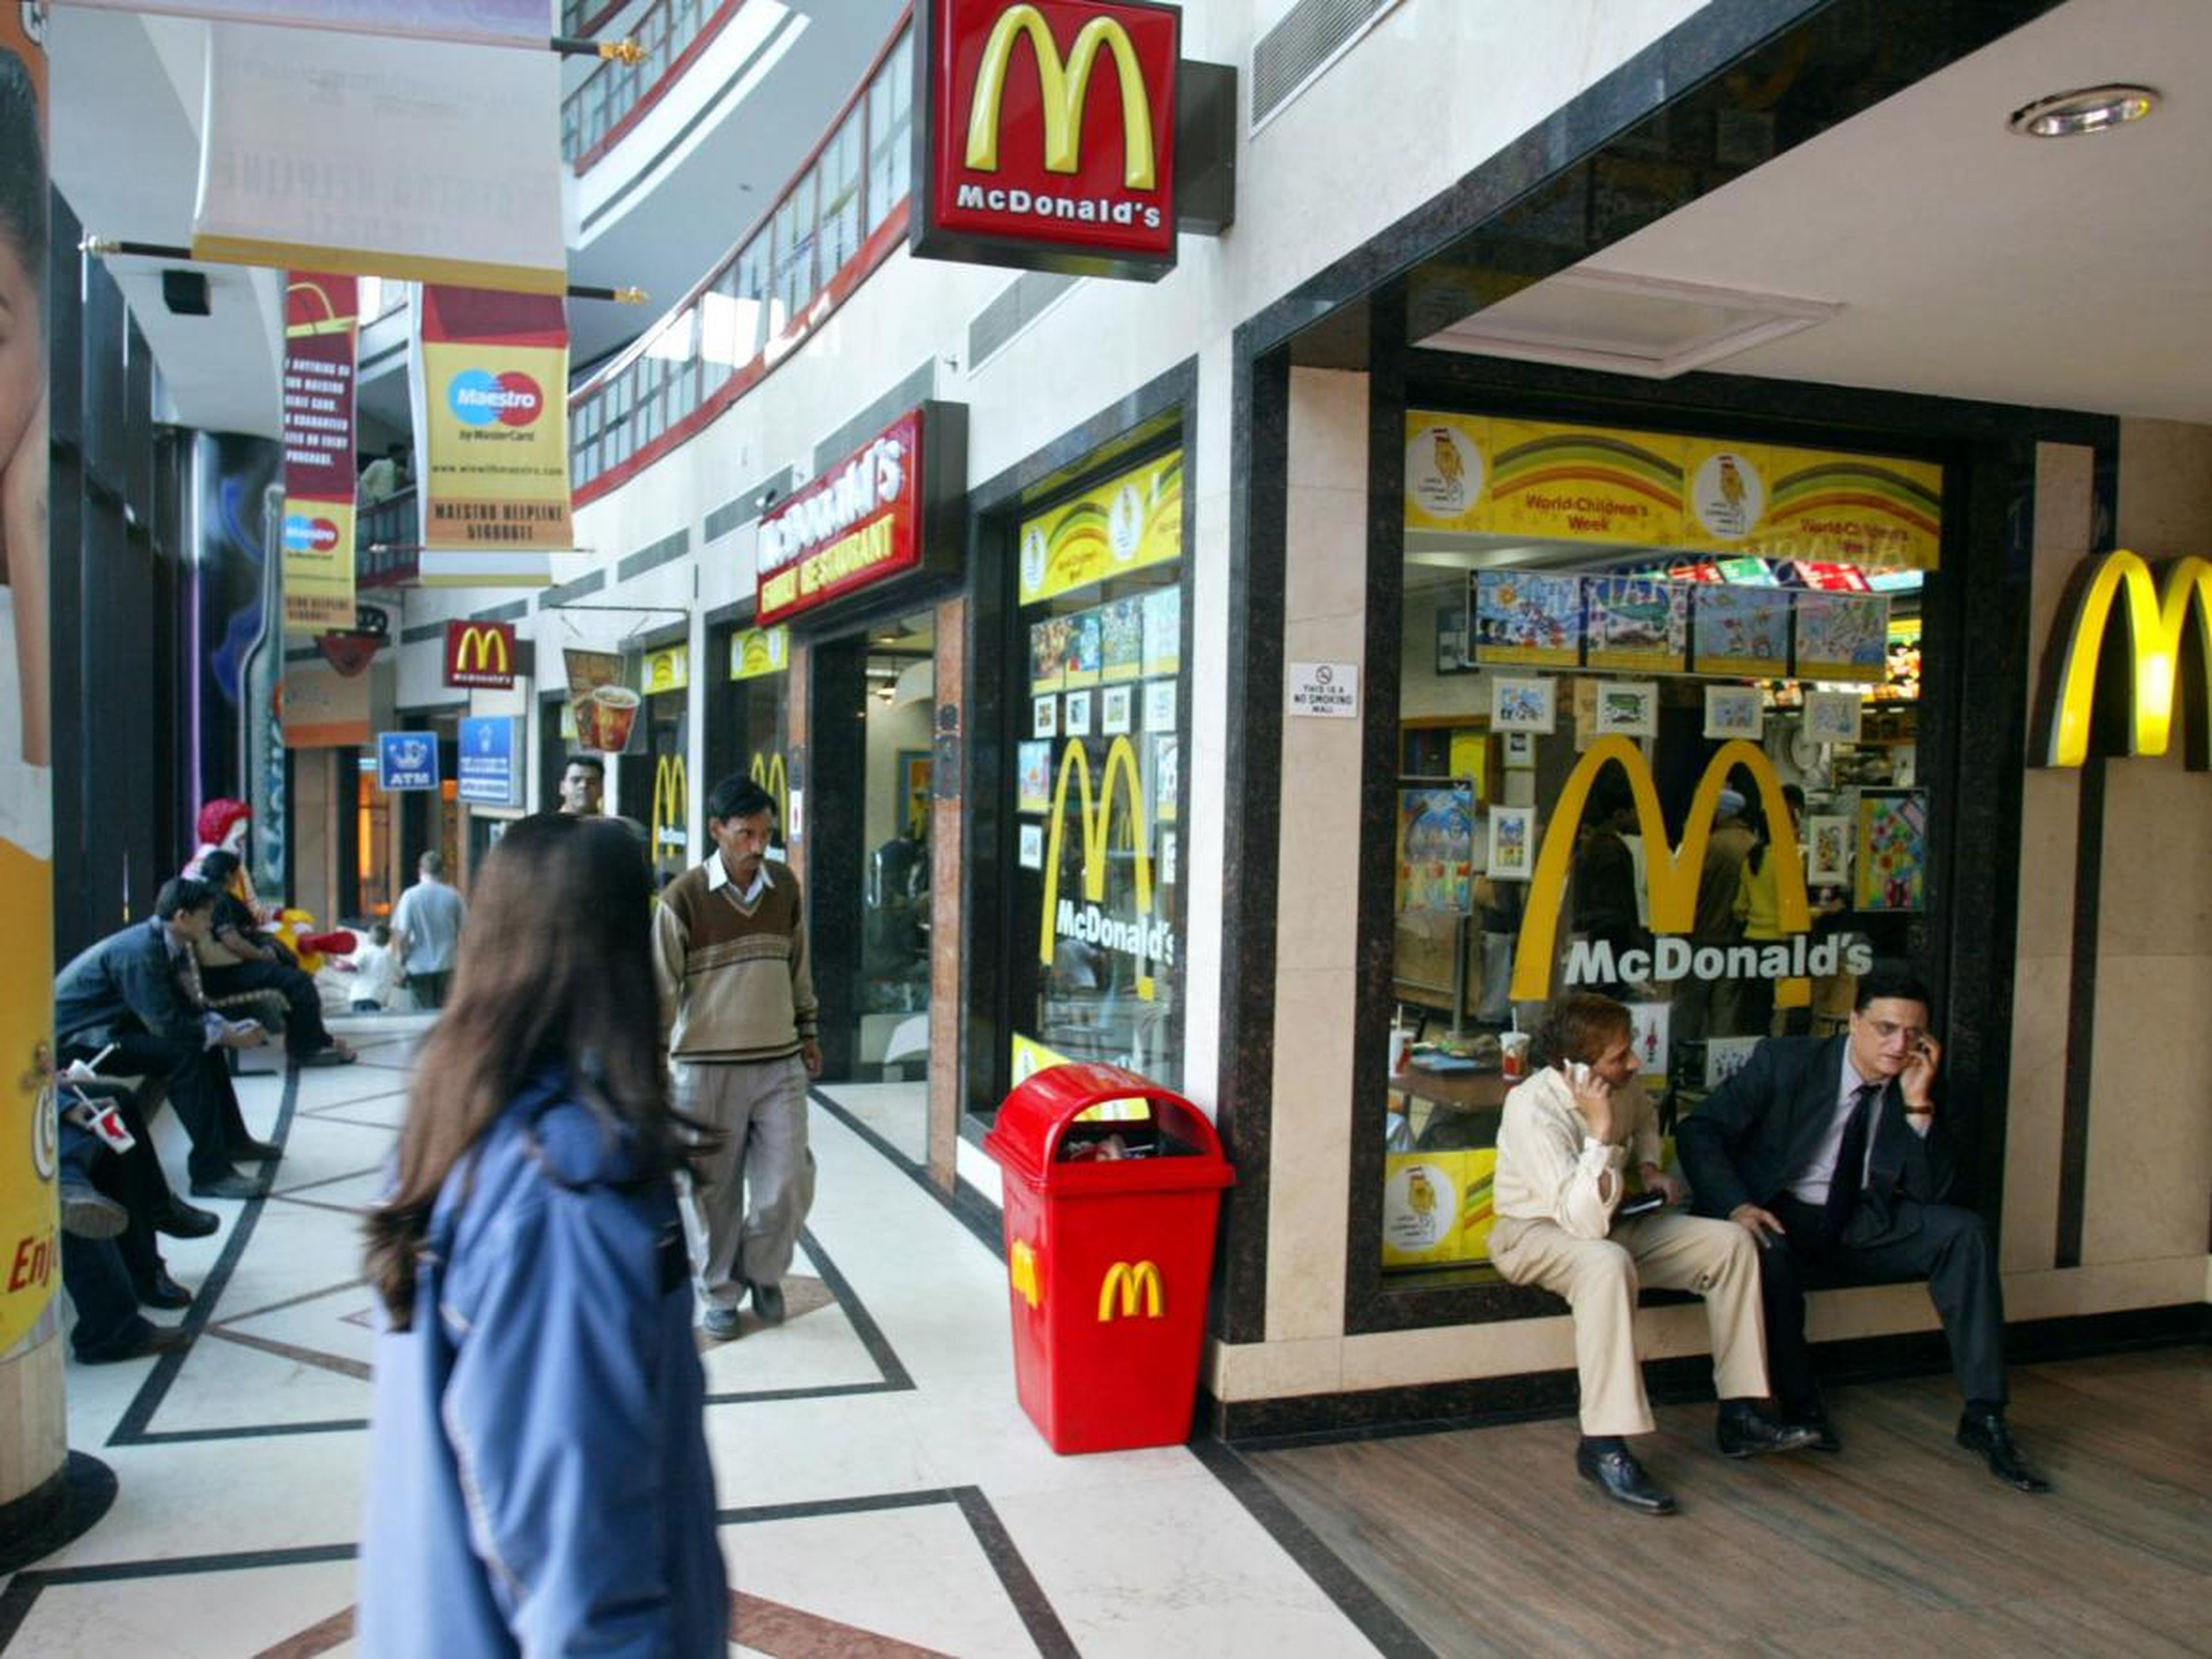 This McDonald's in Delhi looks very similar to its locations in the US.